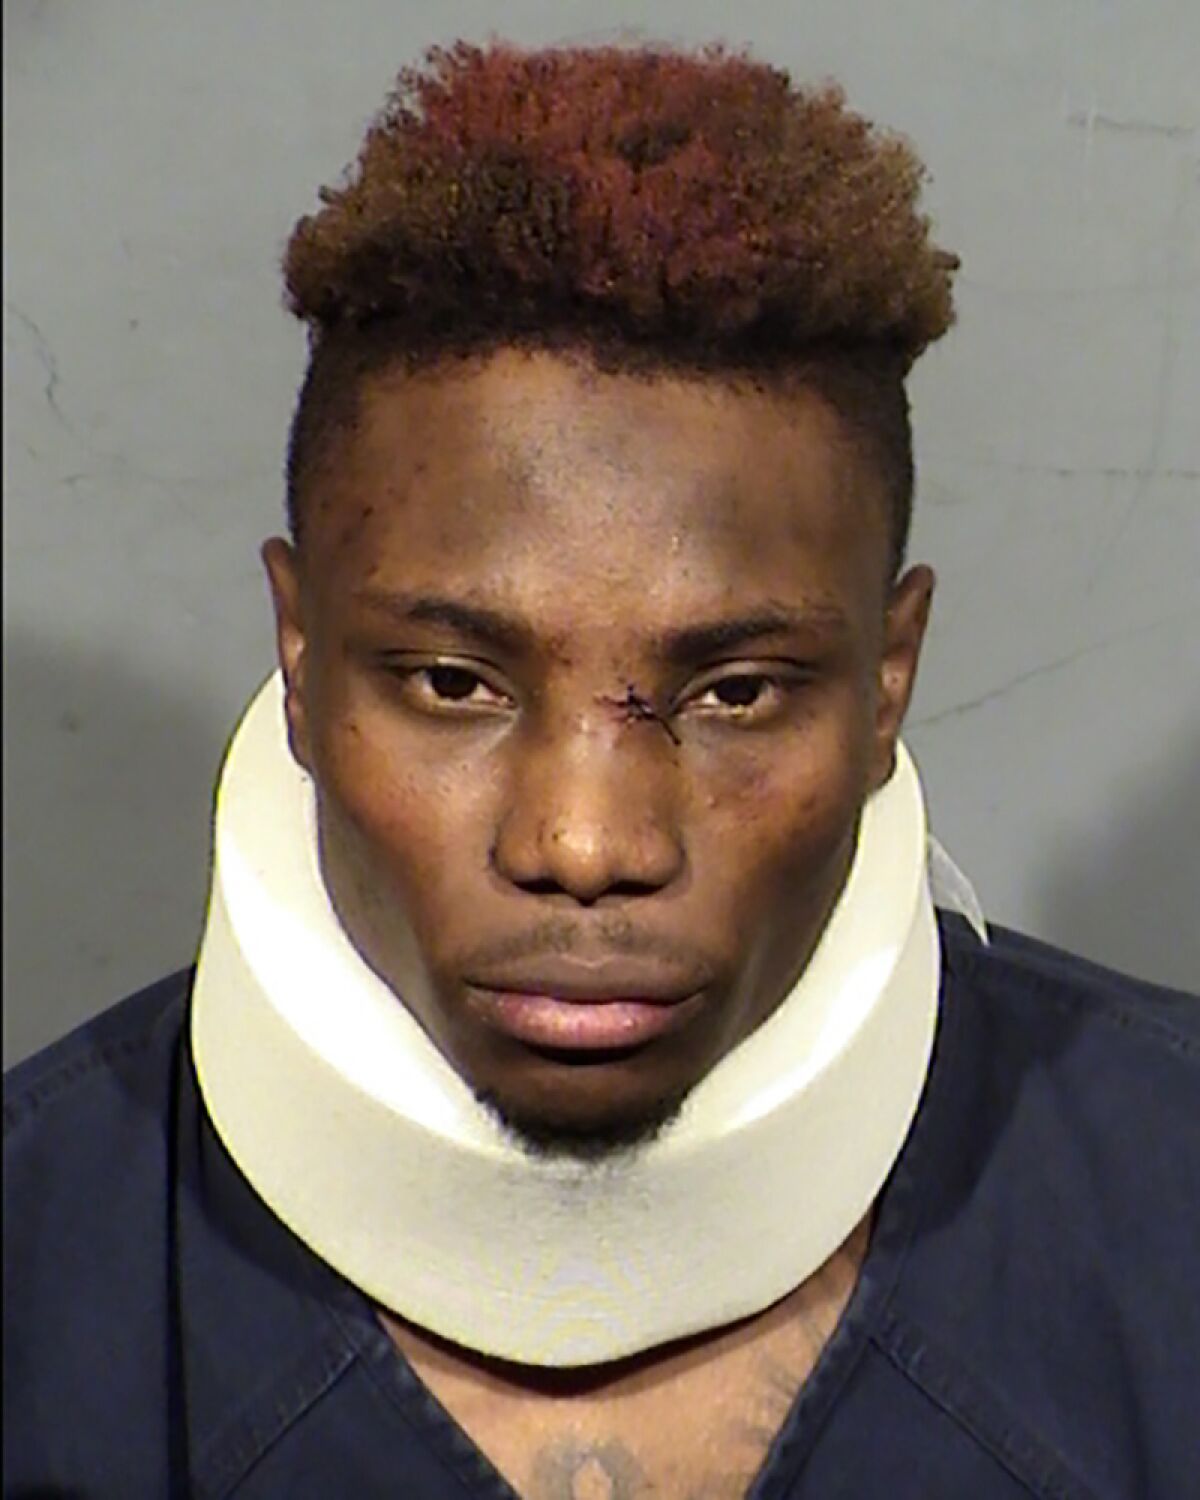 FILE - This booking photo provided by Las Vegas Metropolitan Police Department shows former Las Vegas Raiders wide receiver Henry Ruggs III following his arrest Tuesday, Nov. 2, 2021. Ruggs' lawyers are asking a judge to throw out evidence that prosecutors say shows Ruggs had a blood-alcohol level twice legal limit while speeding at 156 mph before a fiery crash that killed a woman last November. (Clark County Detention Center via AP, File)